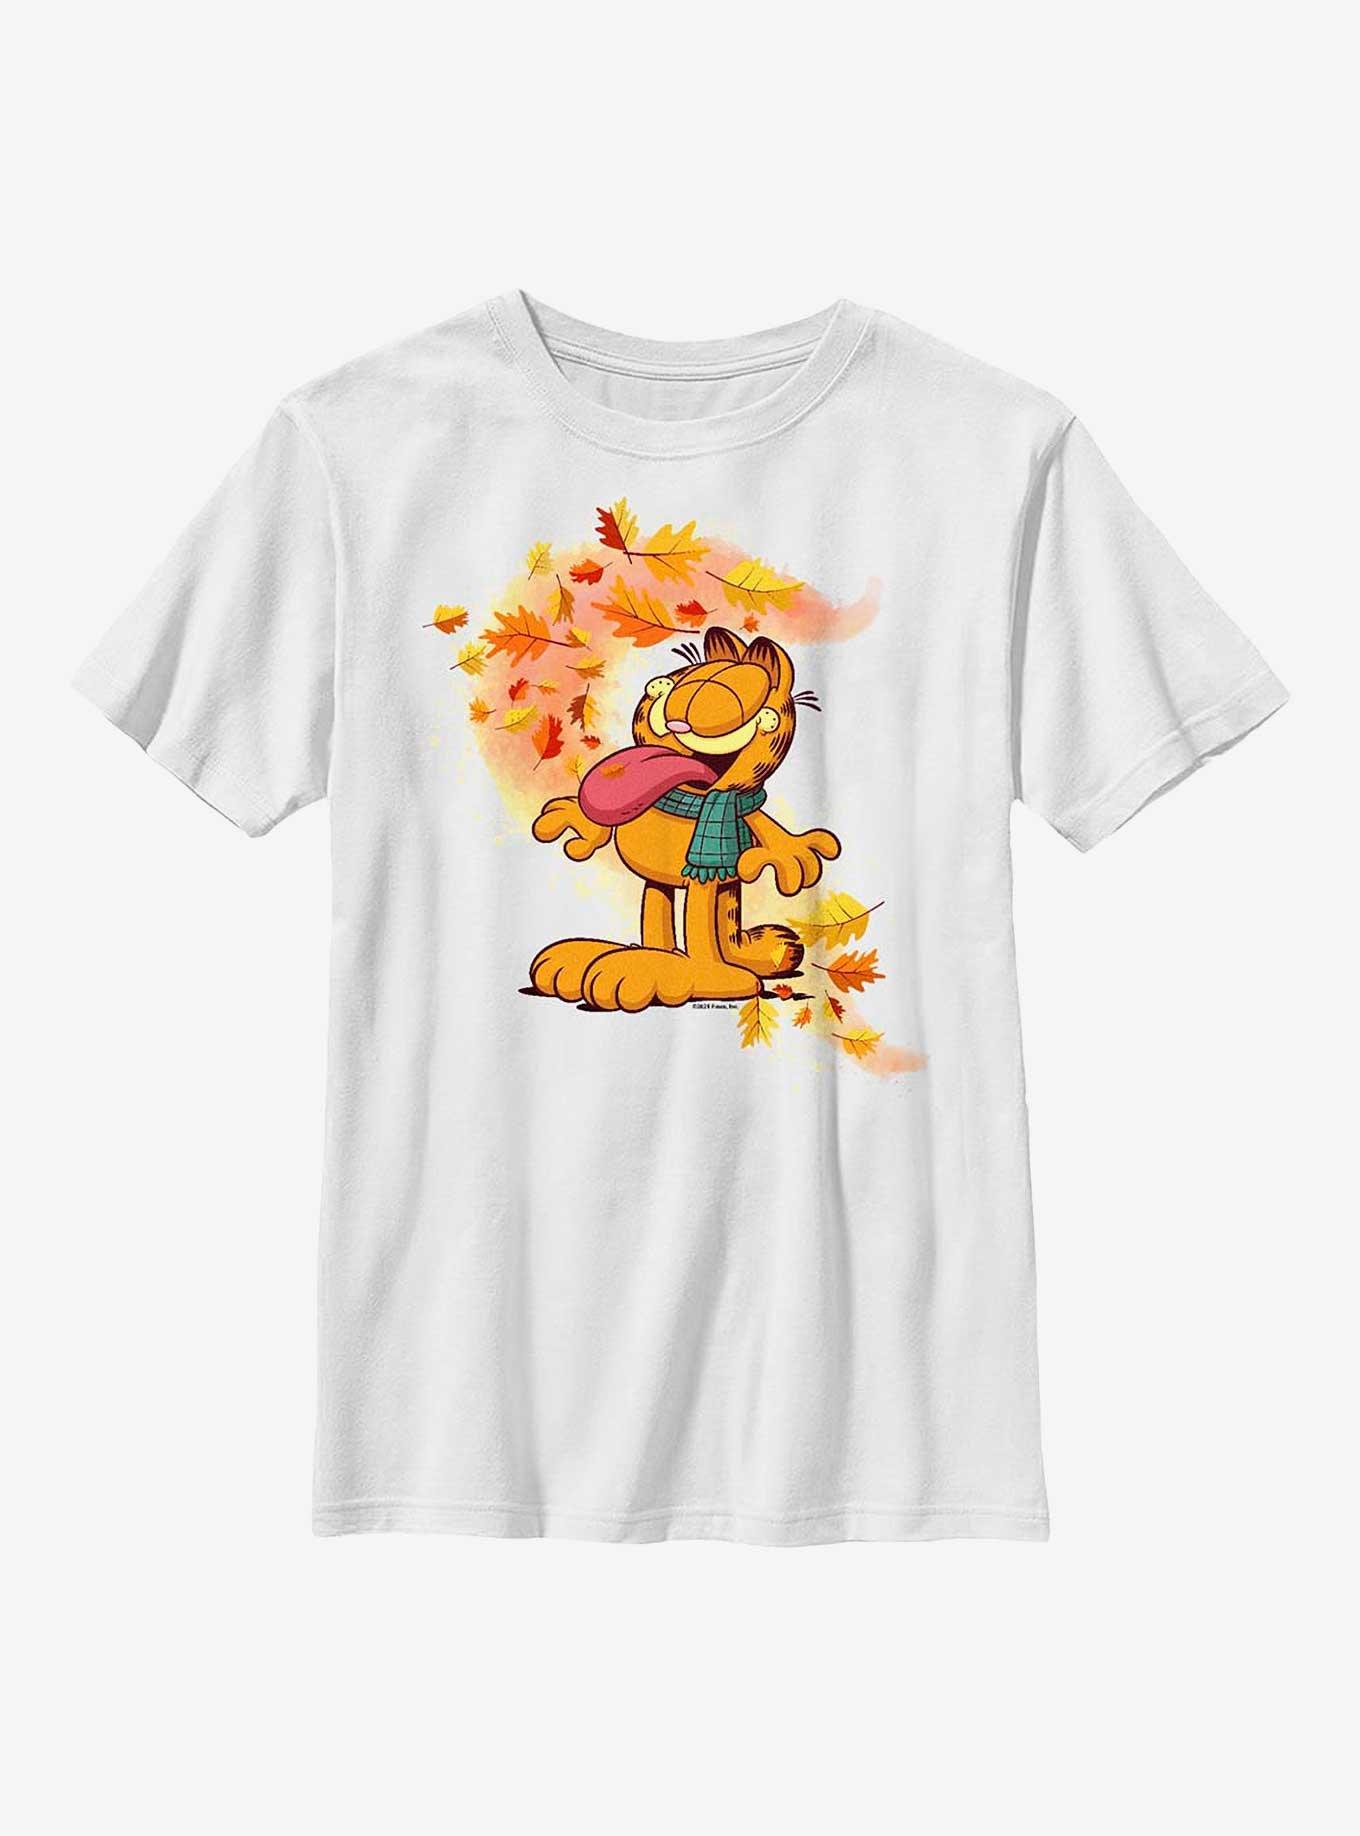 Garfield Autum Leaves Youth T-Shirt, WHITE, hi-res